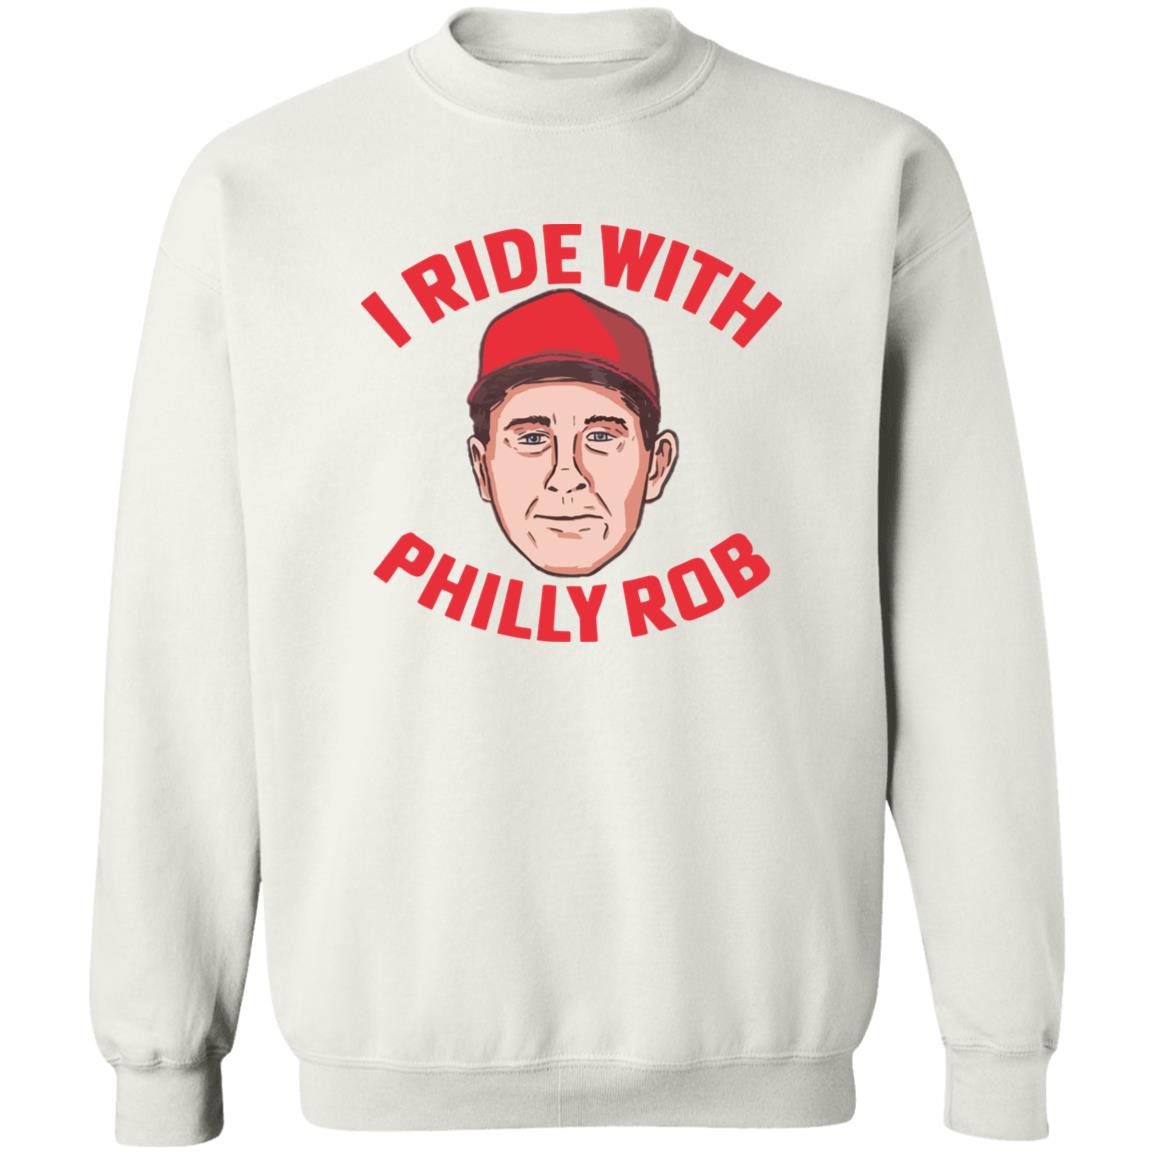 I Ride With Philly Rob Shirt 2